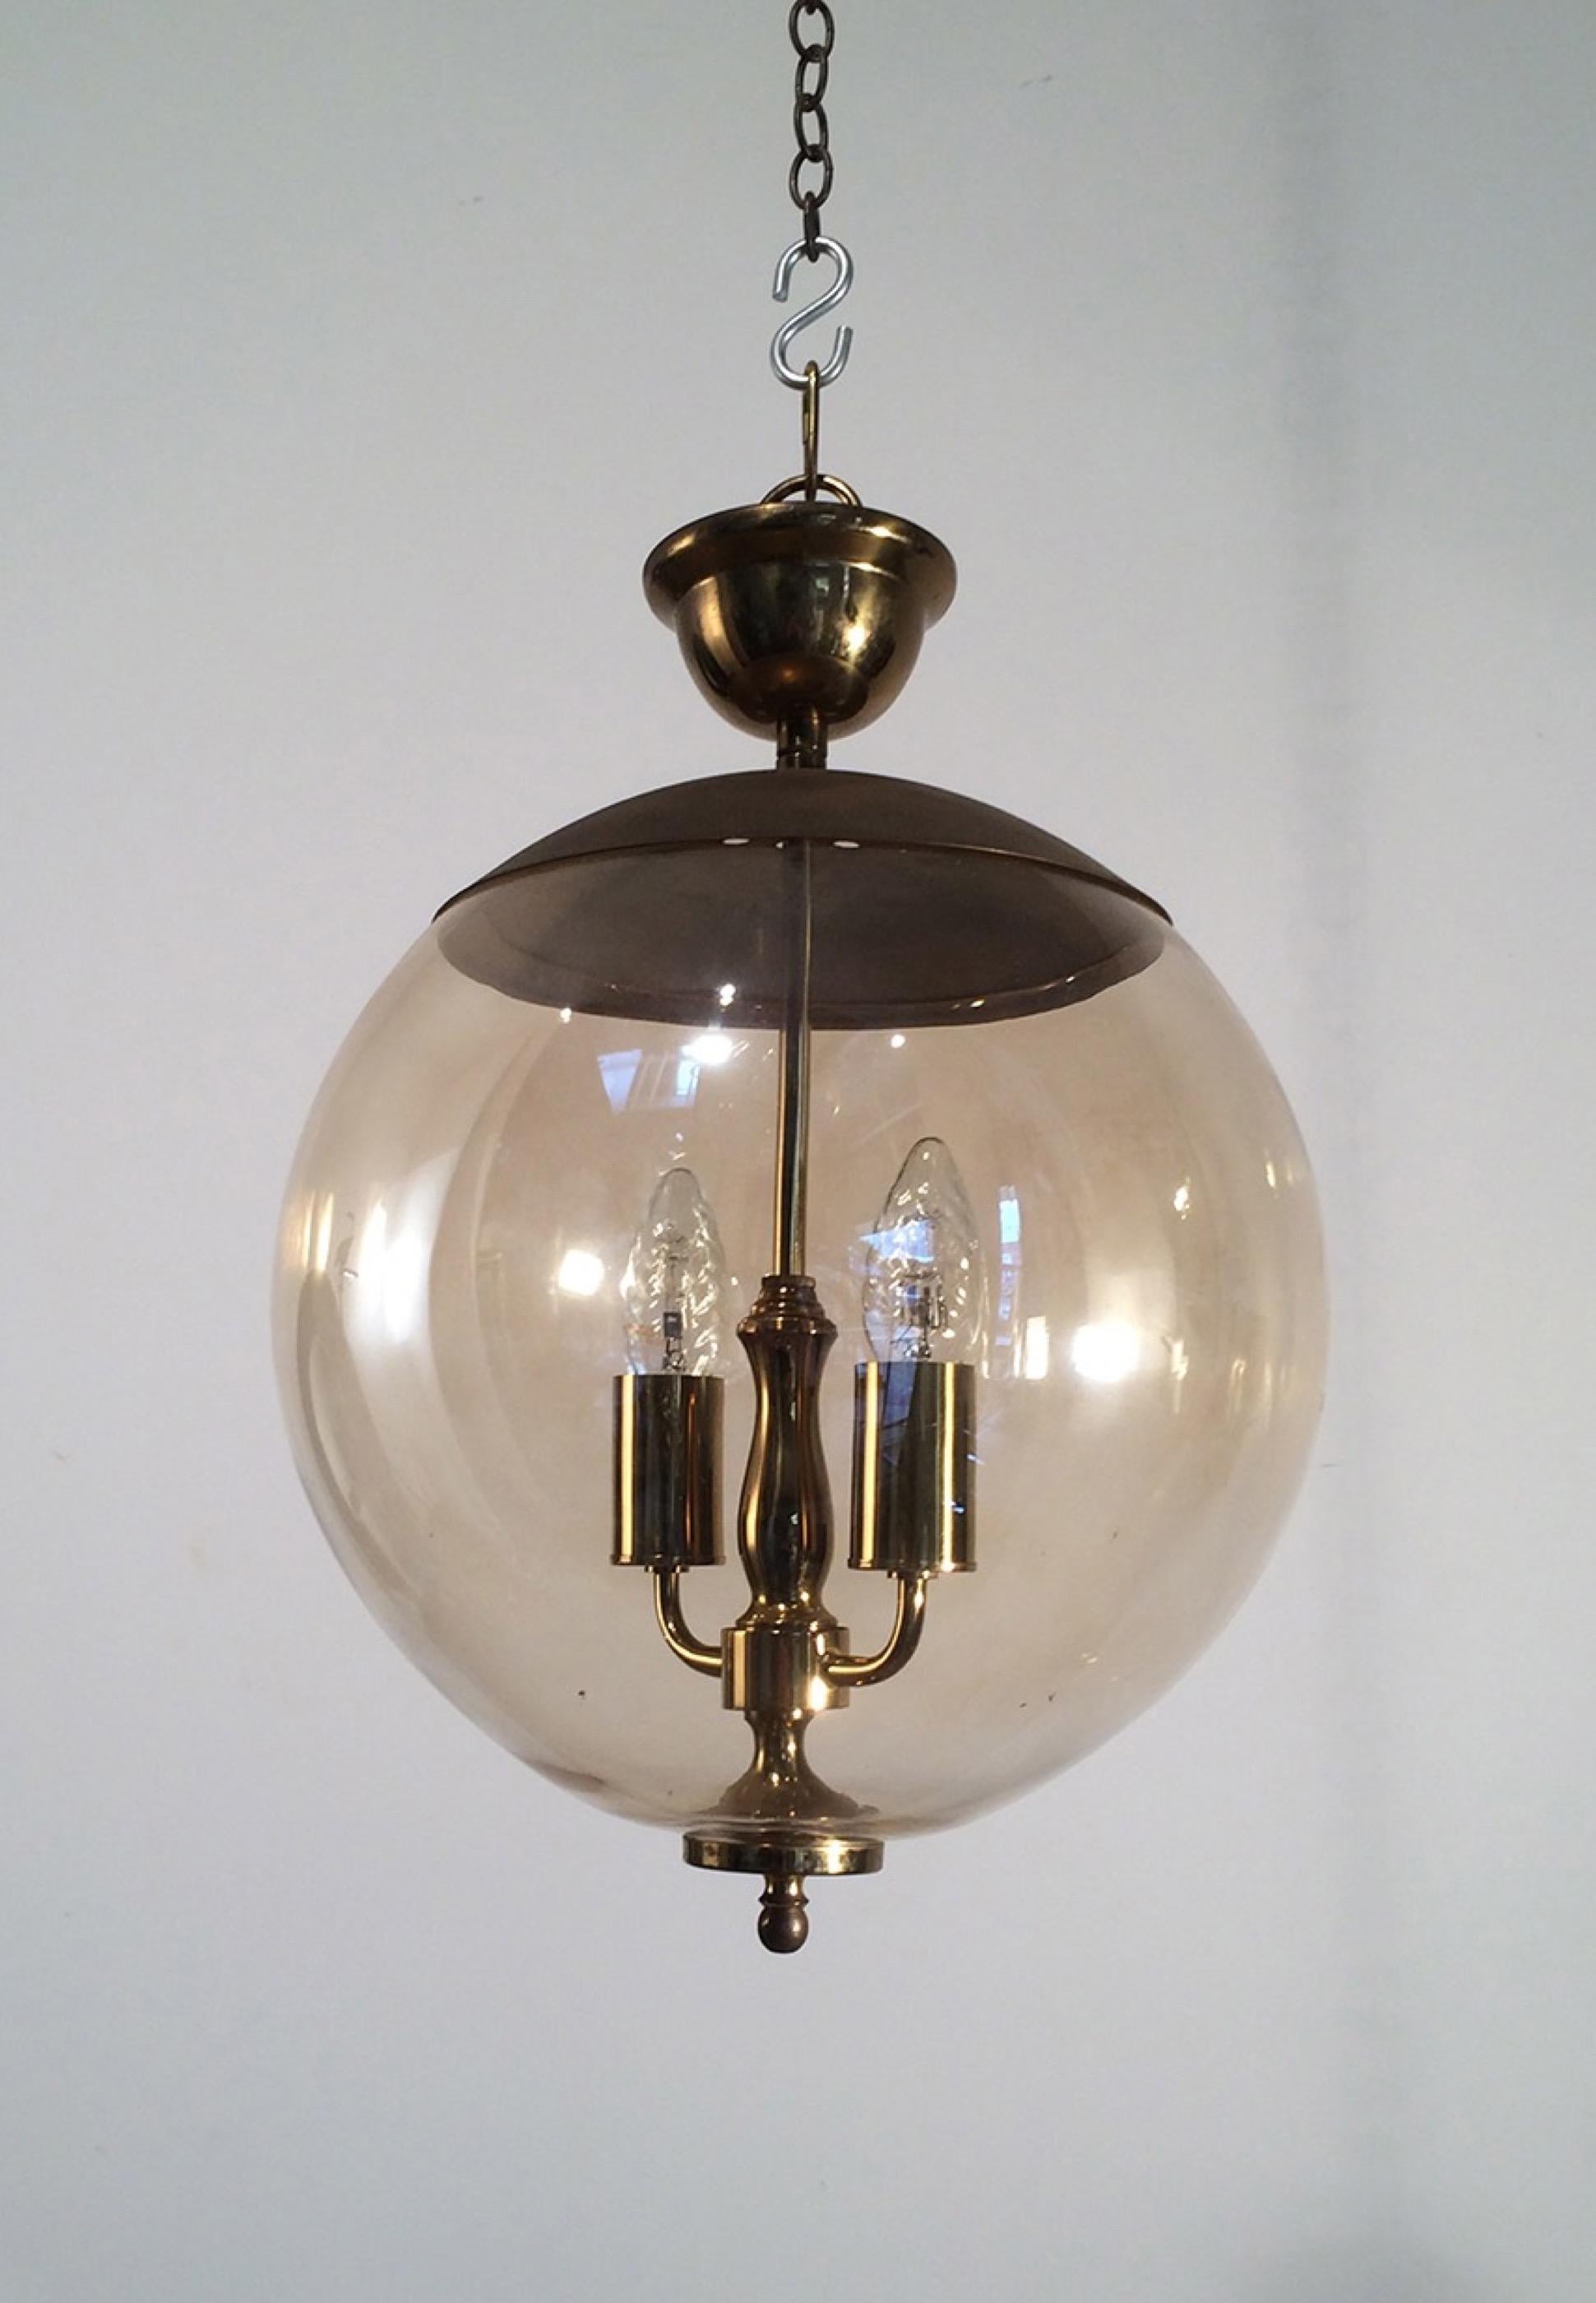 This Unusual fixture is made of a smoked glass ball including a brass double light with brass top and finial on the bottom. This is a French work, circa 1970.